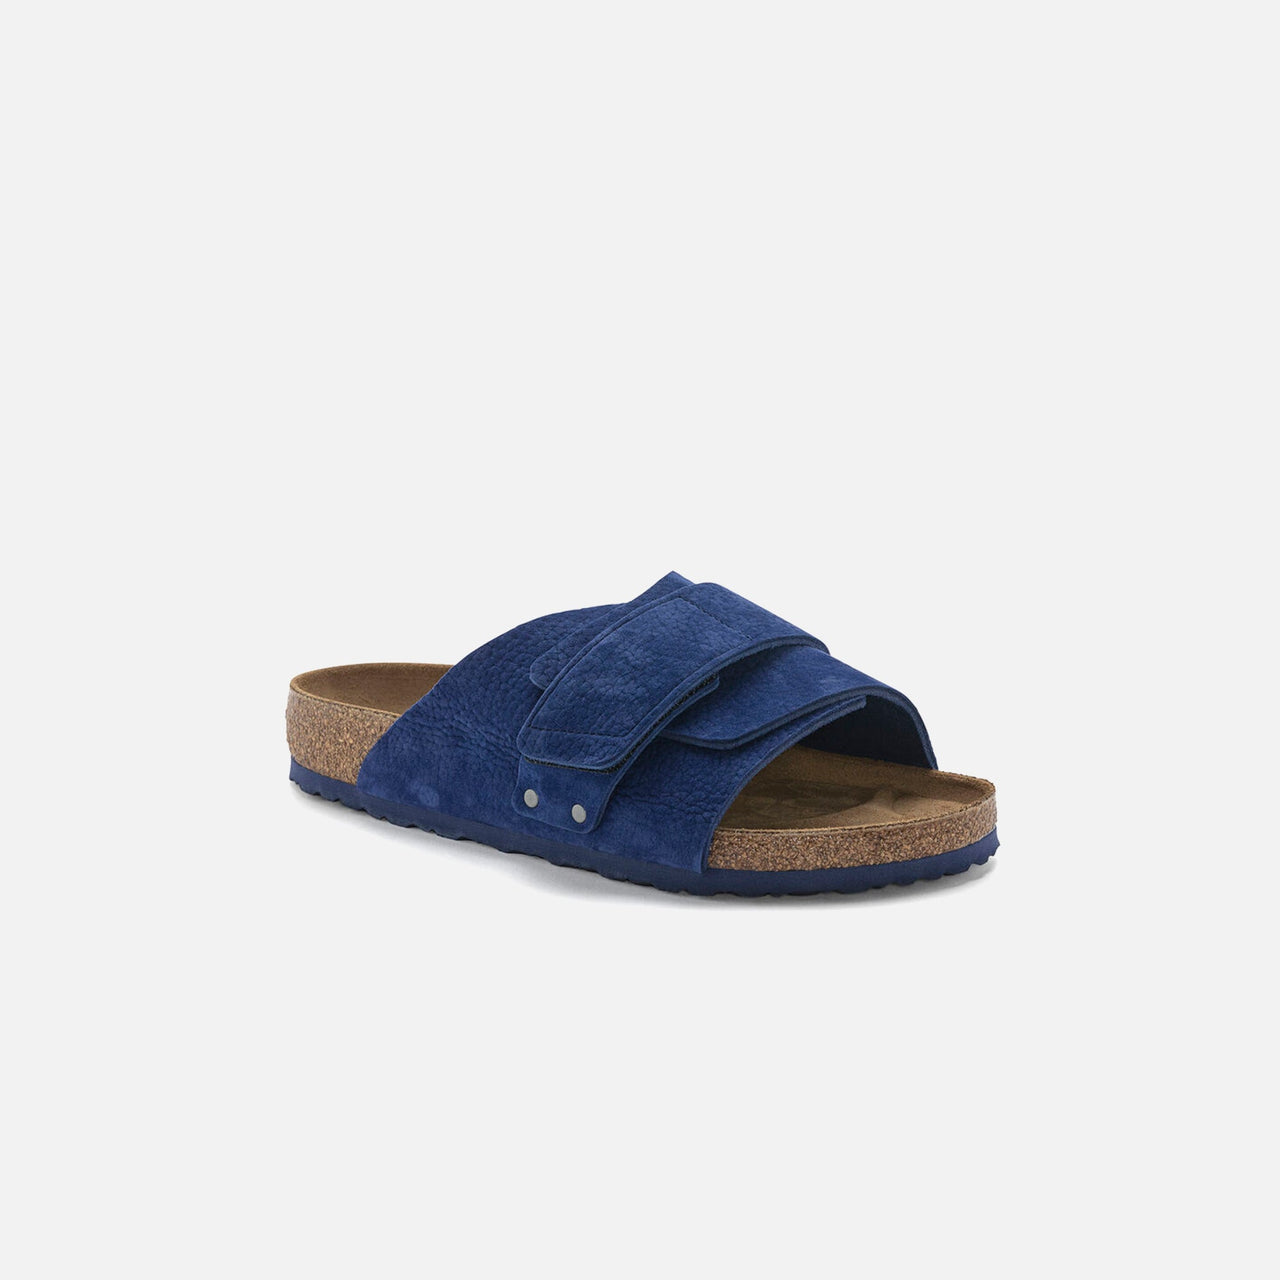 Side view of Birkenstock Kyoto Suede Ultra Blue sandal with durable rubber sole